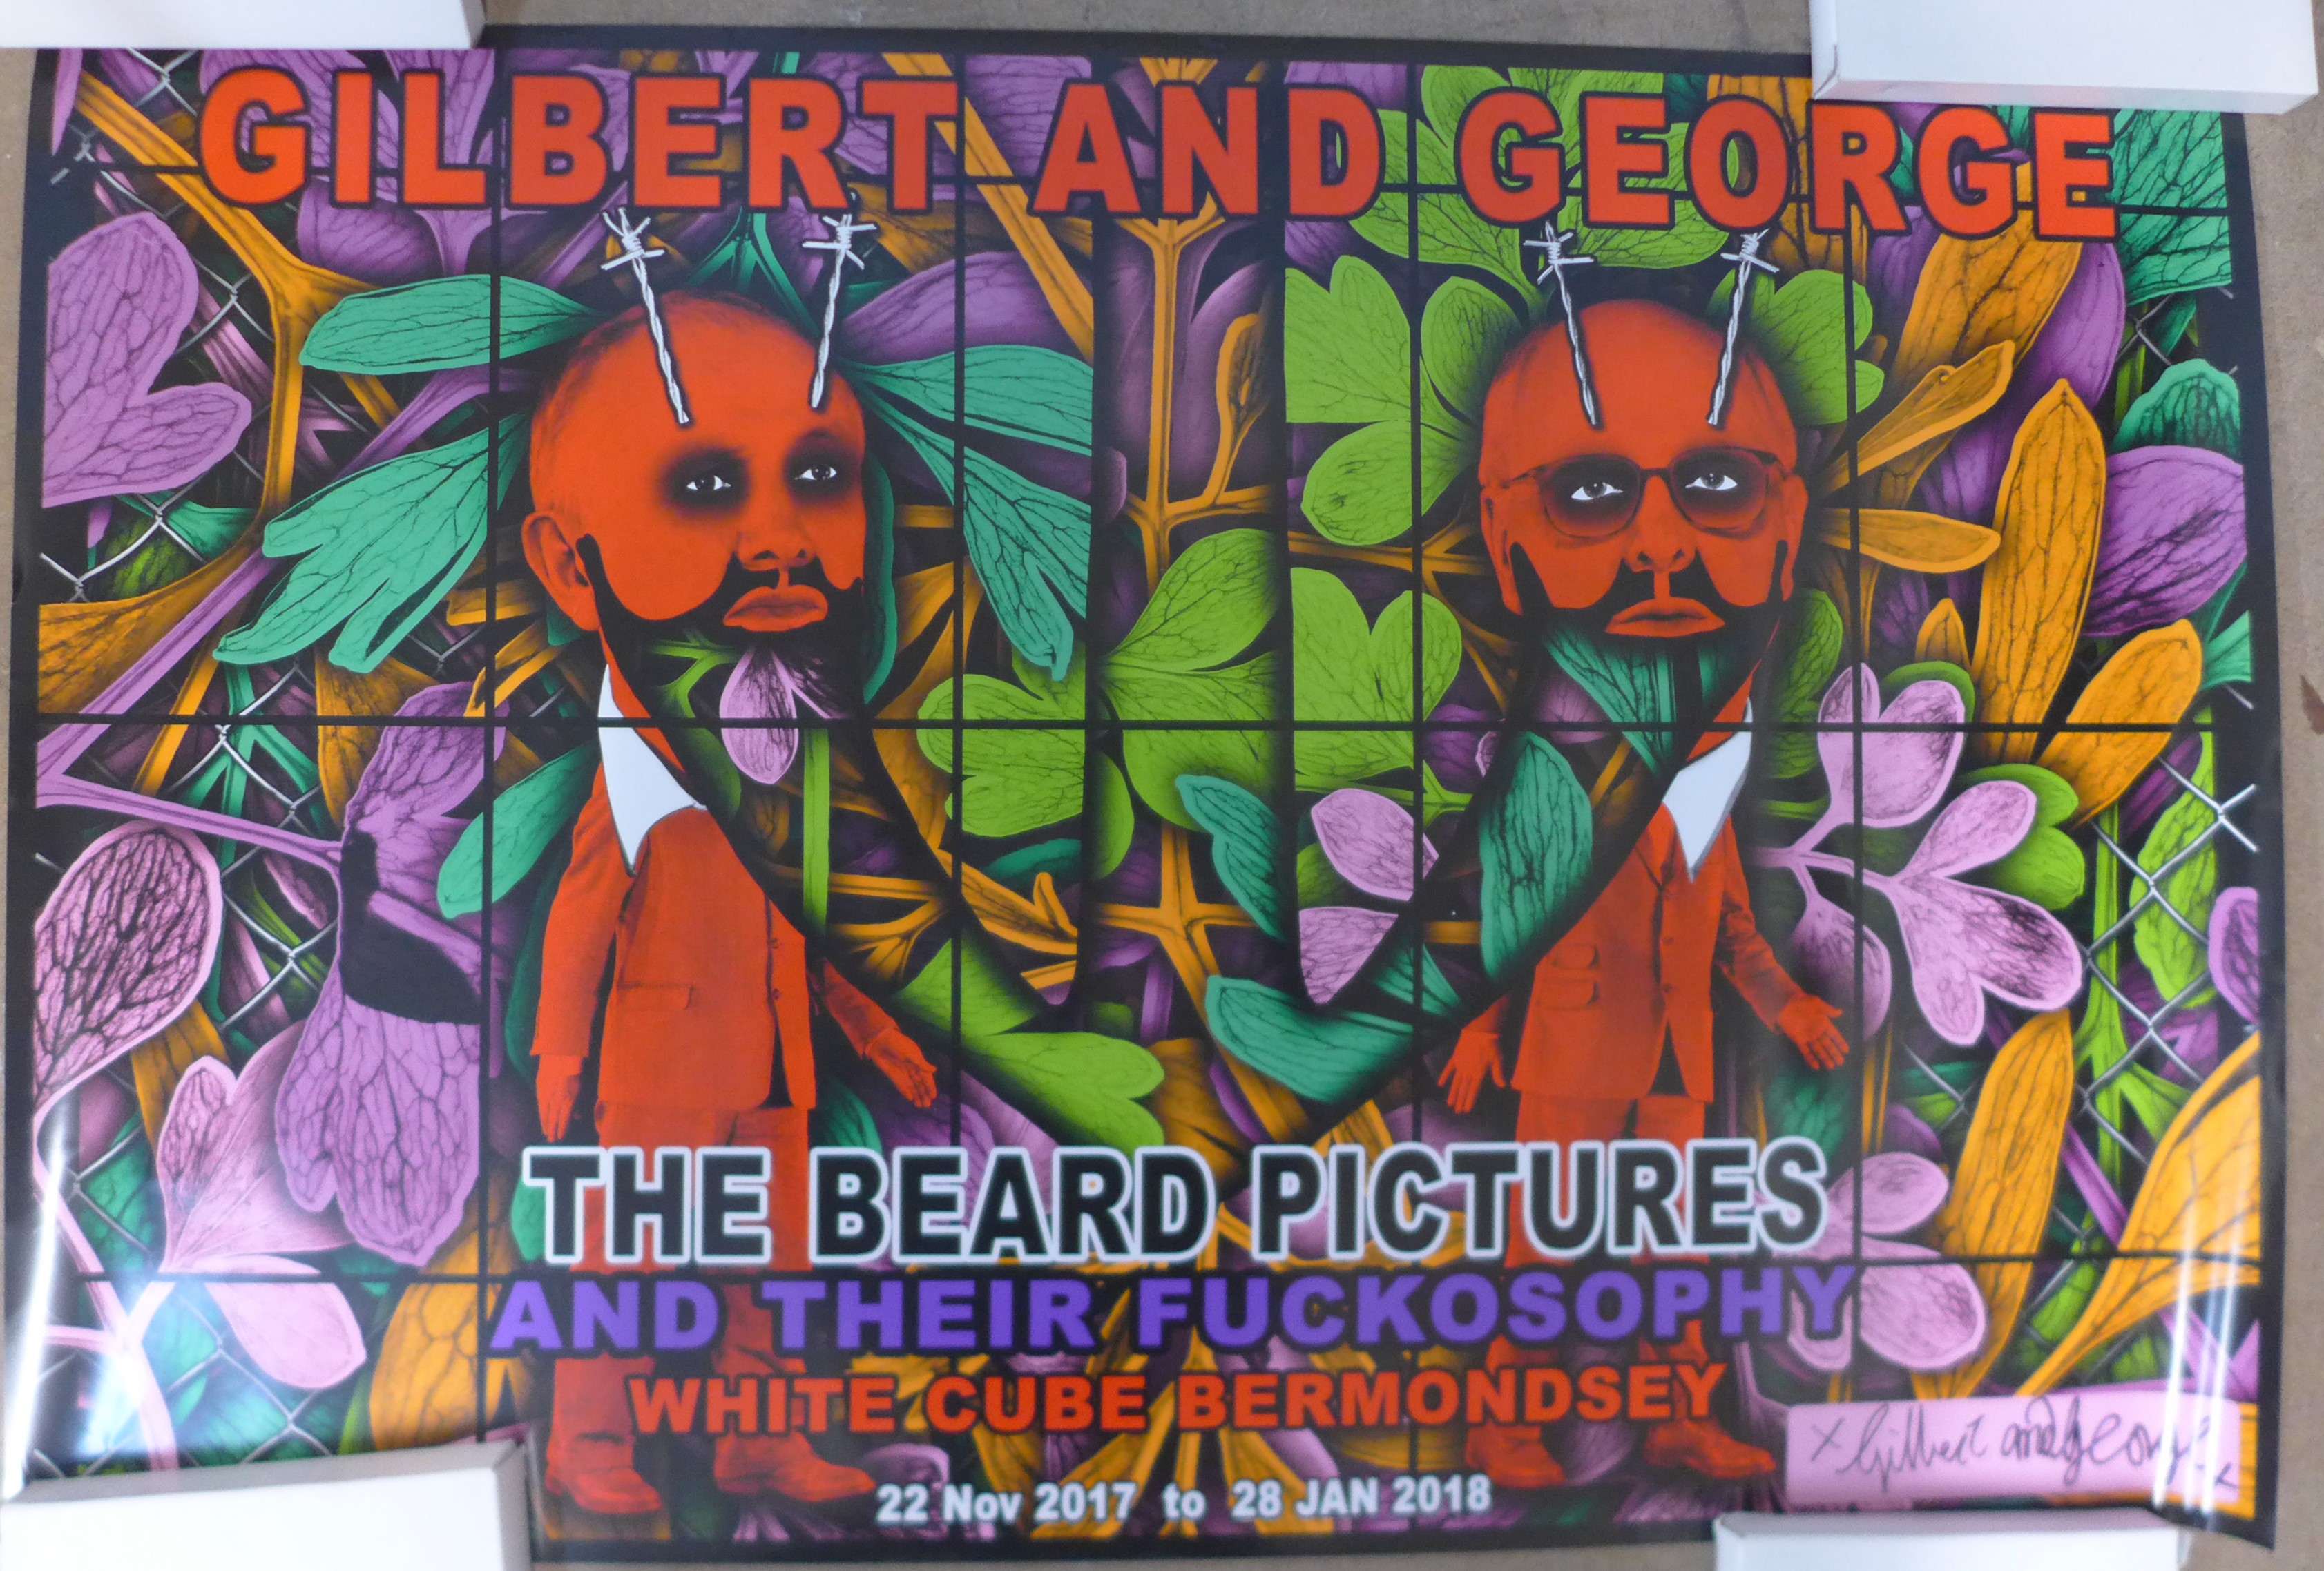 A set of six signed Gilbert & George posters, The Beard Pictures and Their Fuckosophy, 2017, 600 x - Image 3 of 6